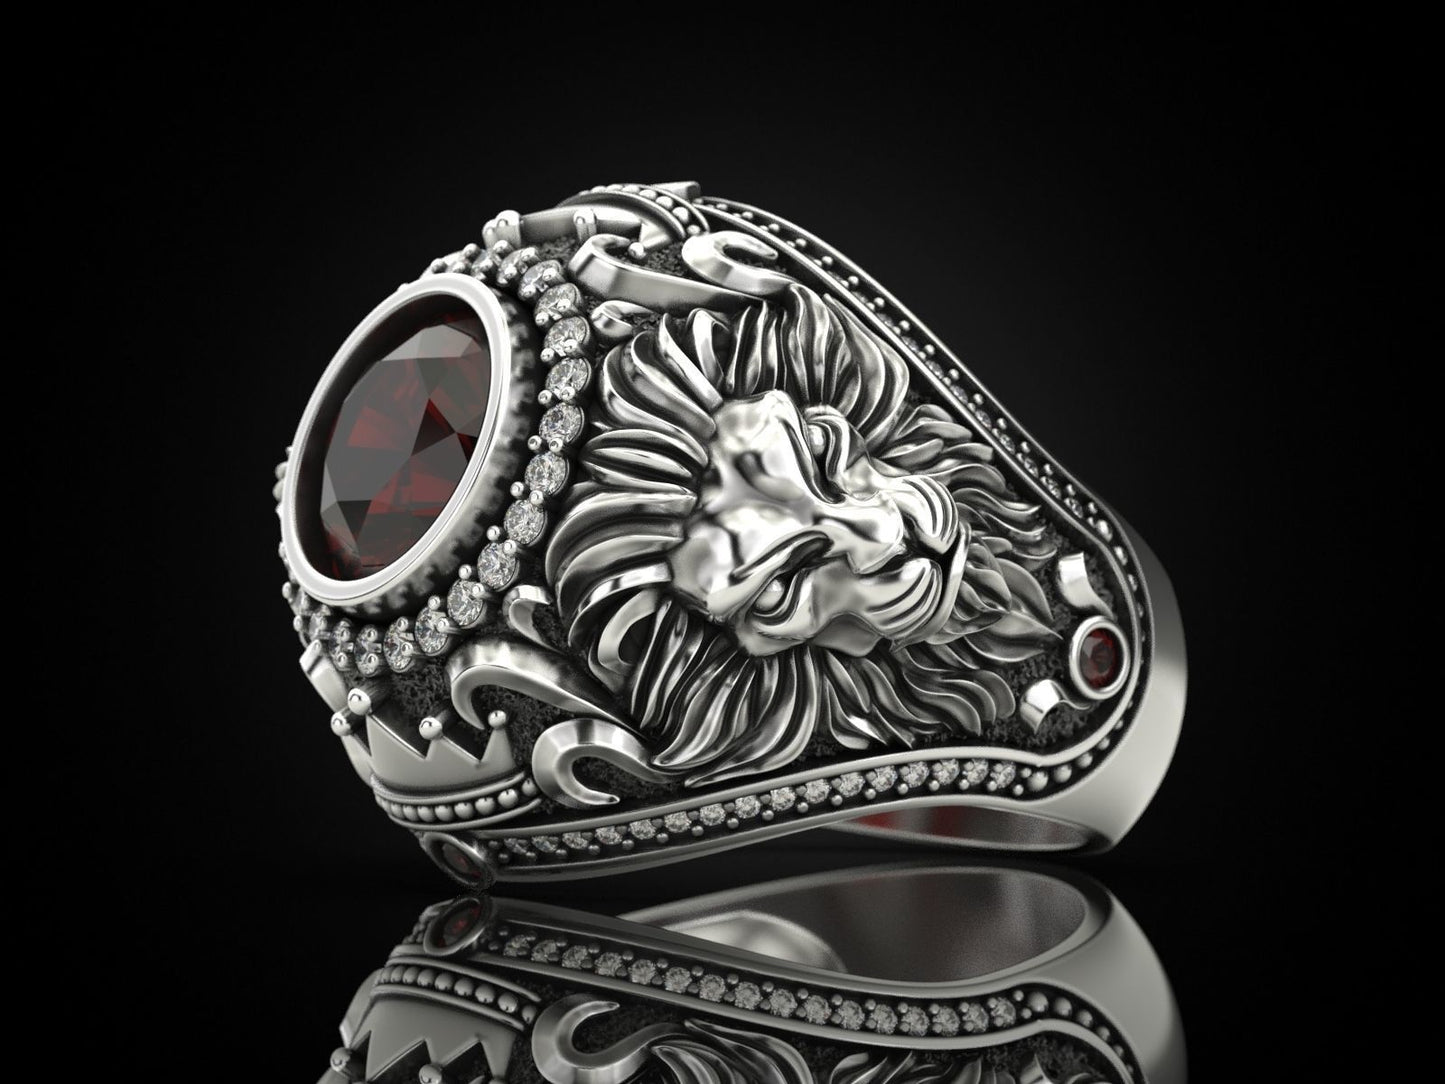 RARE PRINCE by CARAT SUTRA | Unique Designed Double Faced Lion Ring with Red Zircon Stone | 925 Sterling Silver Oxidized Ring | Men's Jewelry | With Certificate of Authenticity and 925 Hallmark